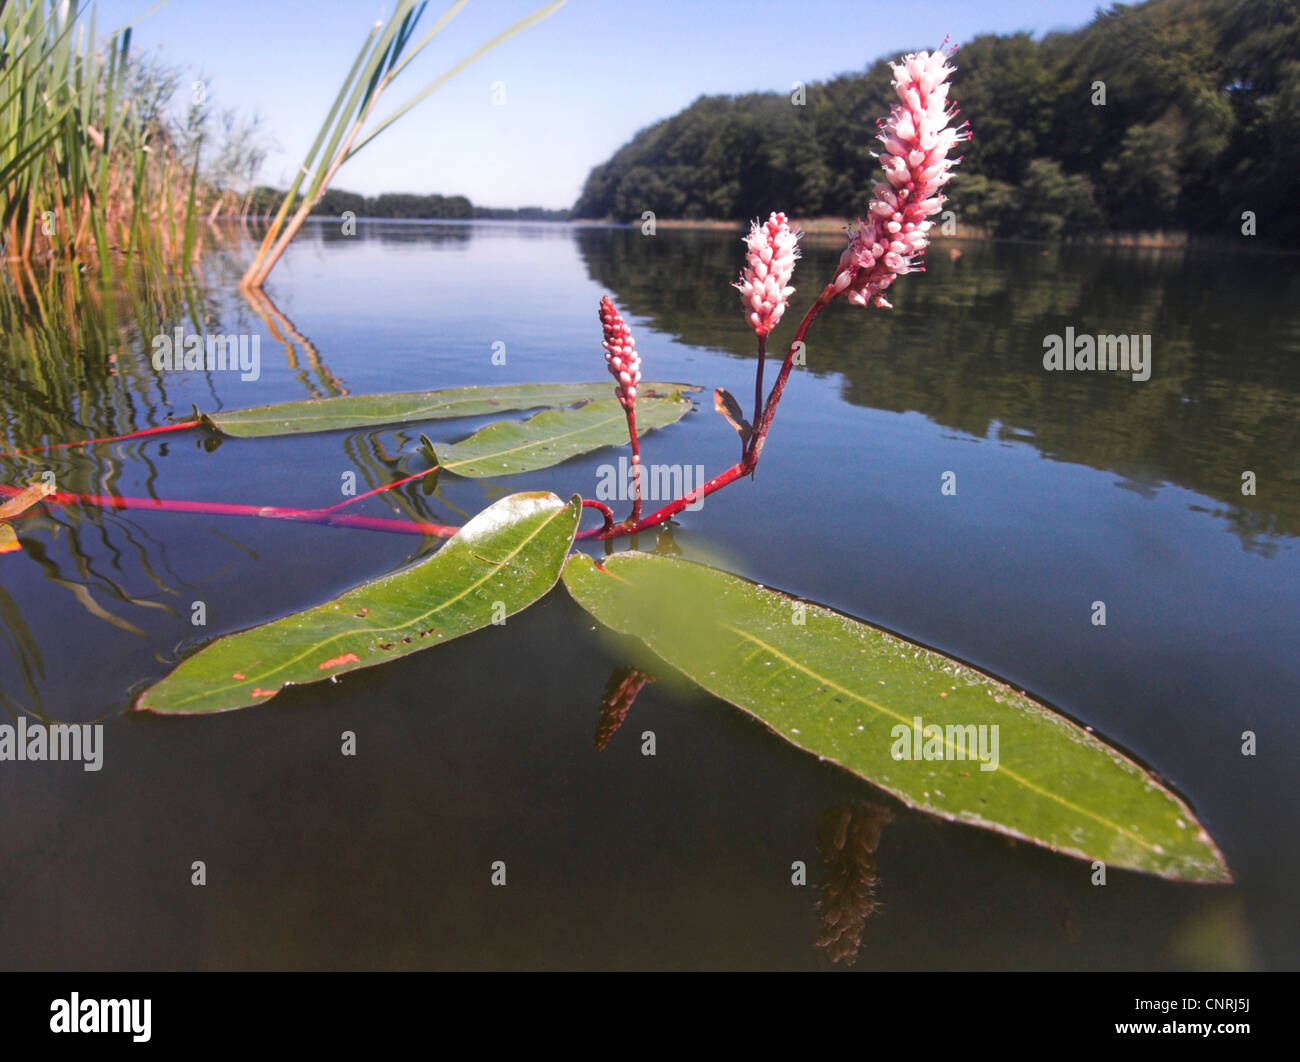 amphibious bistort (Persicaria amphibia, Polygonum amphibium), blooming with swimming leaves, Germany Stock Photo